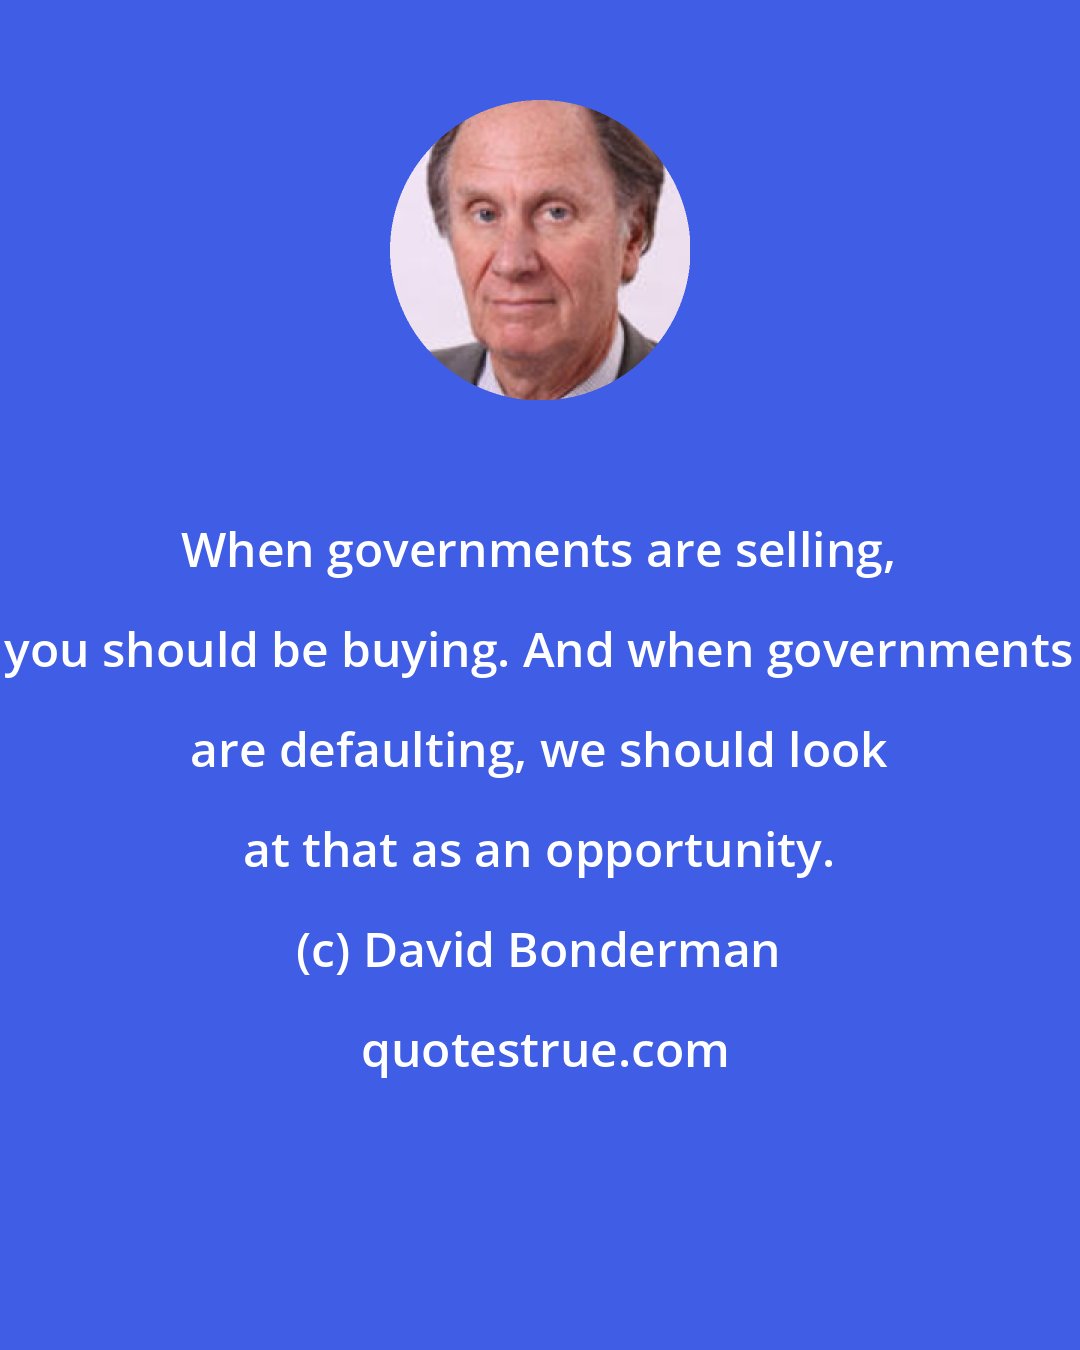 David Bonderman: When governments are selling, you should be buying. And when governments are defaulting, we should look at that as an opportunity.